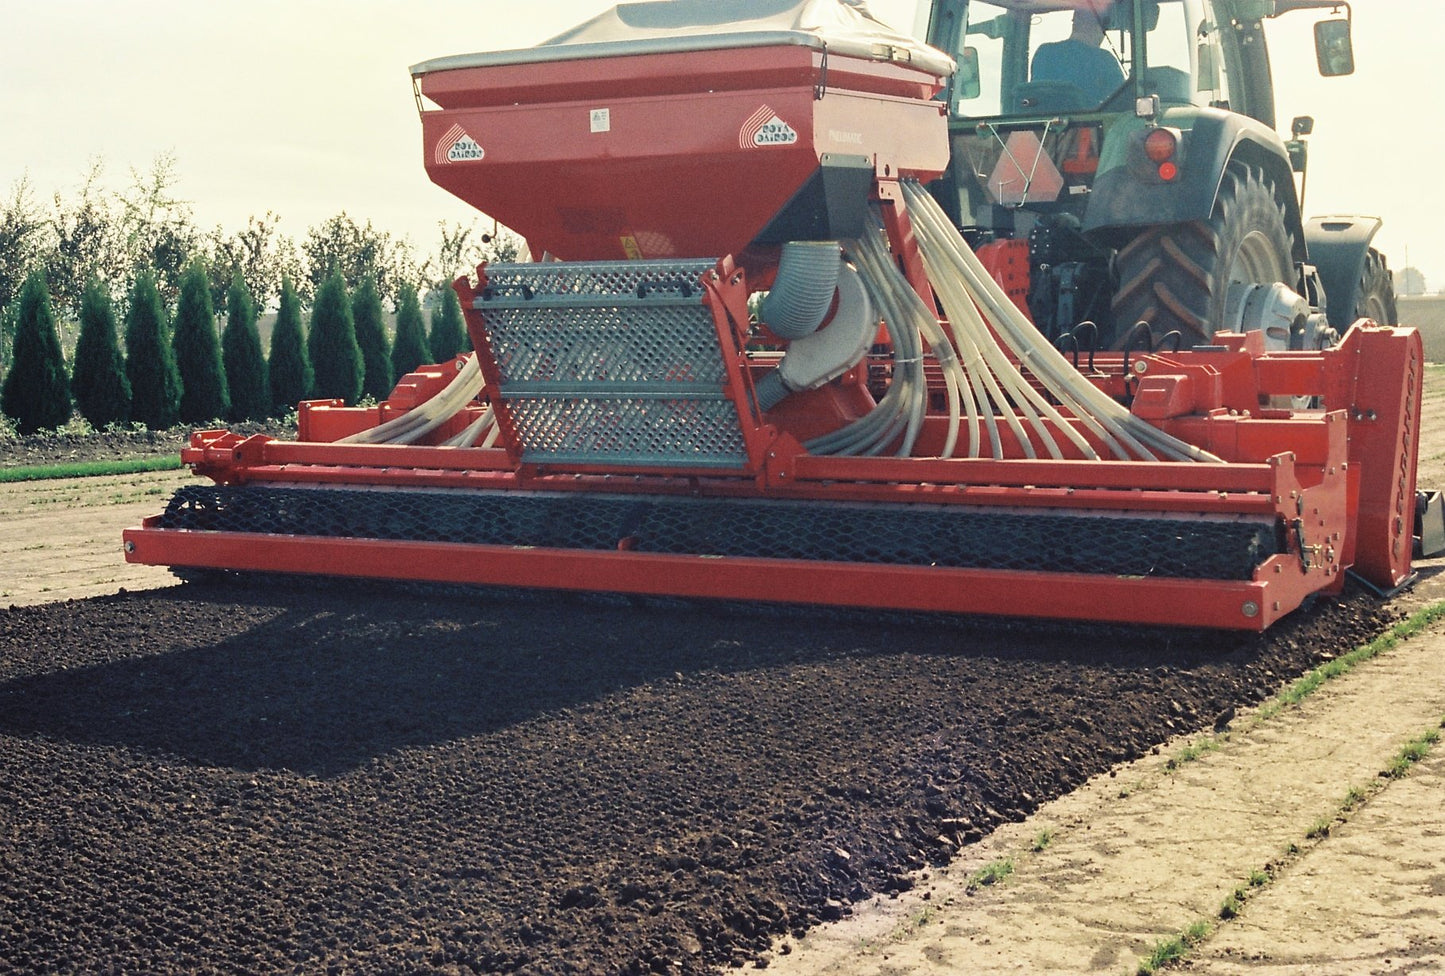 ROTADAIRON STANDARD STONE BURIERS SOIL RENOVATOR FOR COMPACT TRACTORS